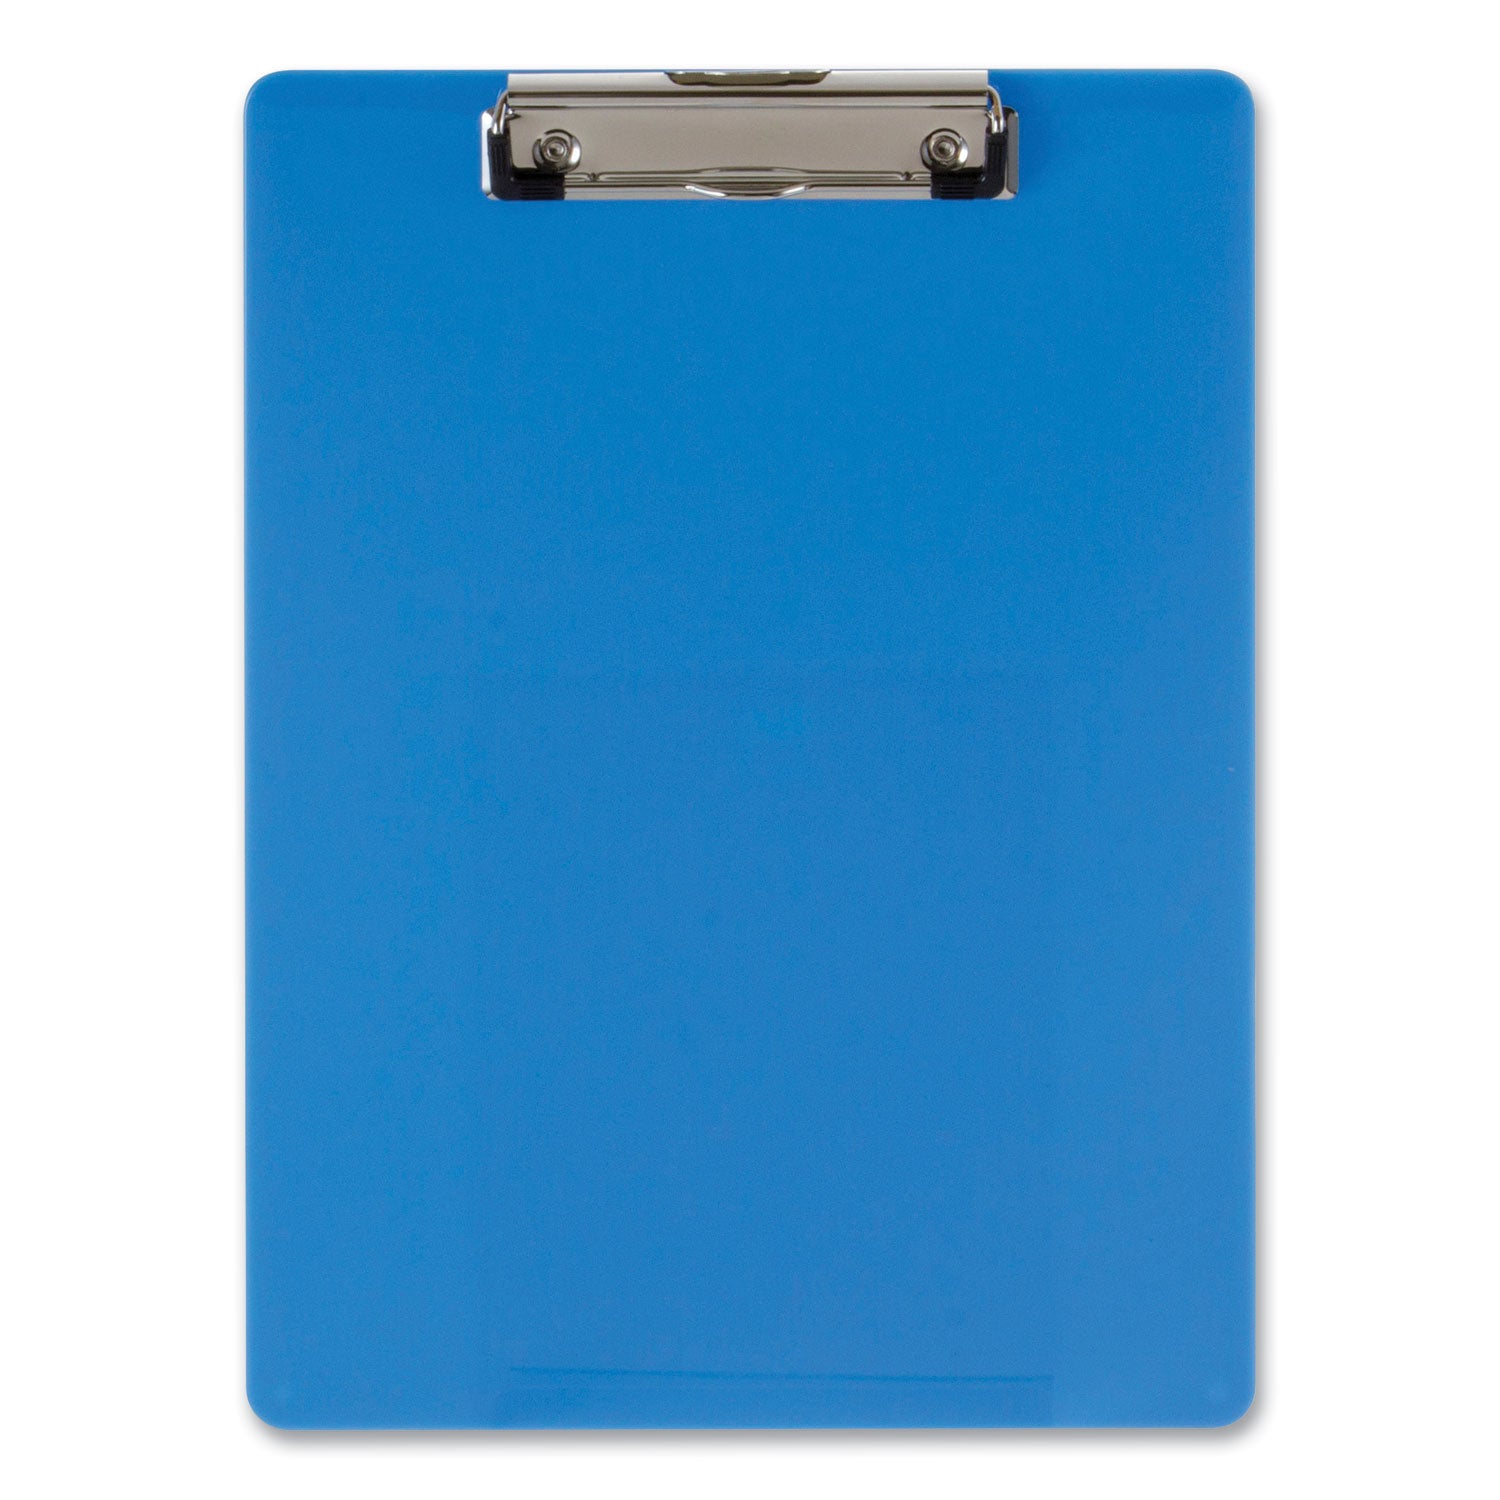 Recycled Plastic Clipboard, Holds 8.5 x 11 Sheets, Blue - 